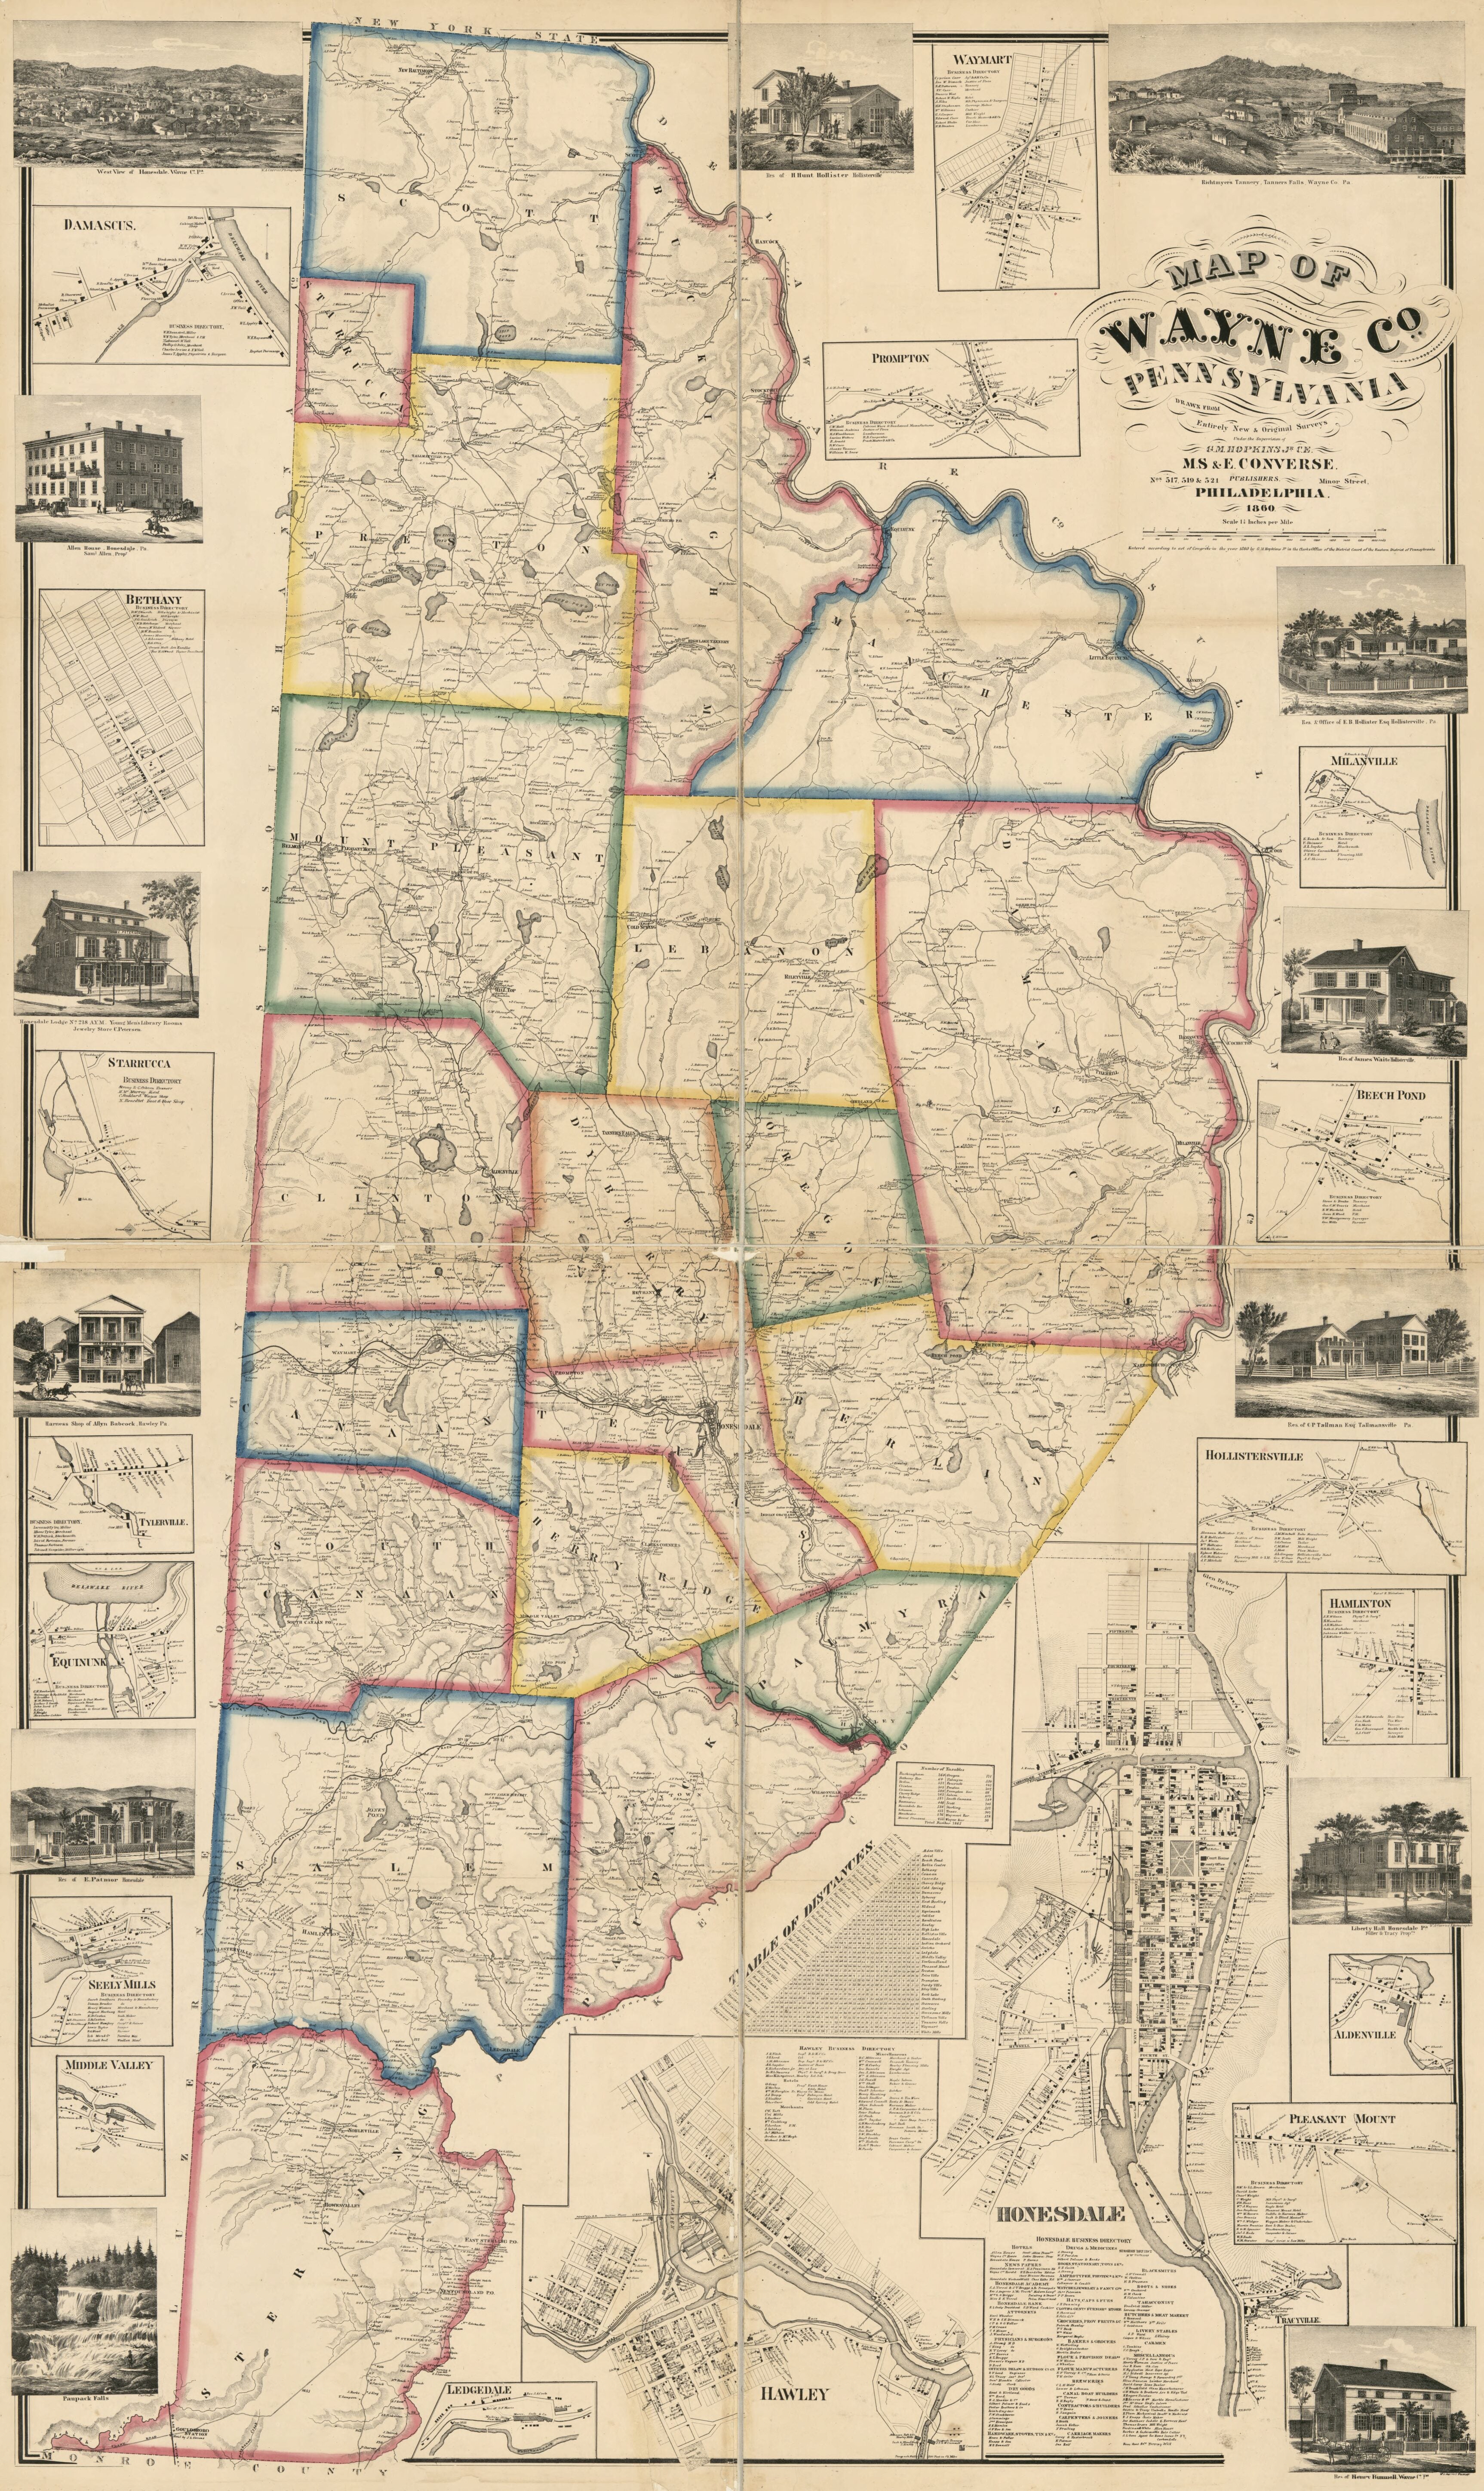 This old map of Map of Wayne Co., Pennsylvania from 1860 was created by Griffith Morgan Hopkins,  M.S. &amp; E. Converse (Firm) in 1860